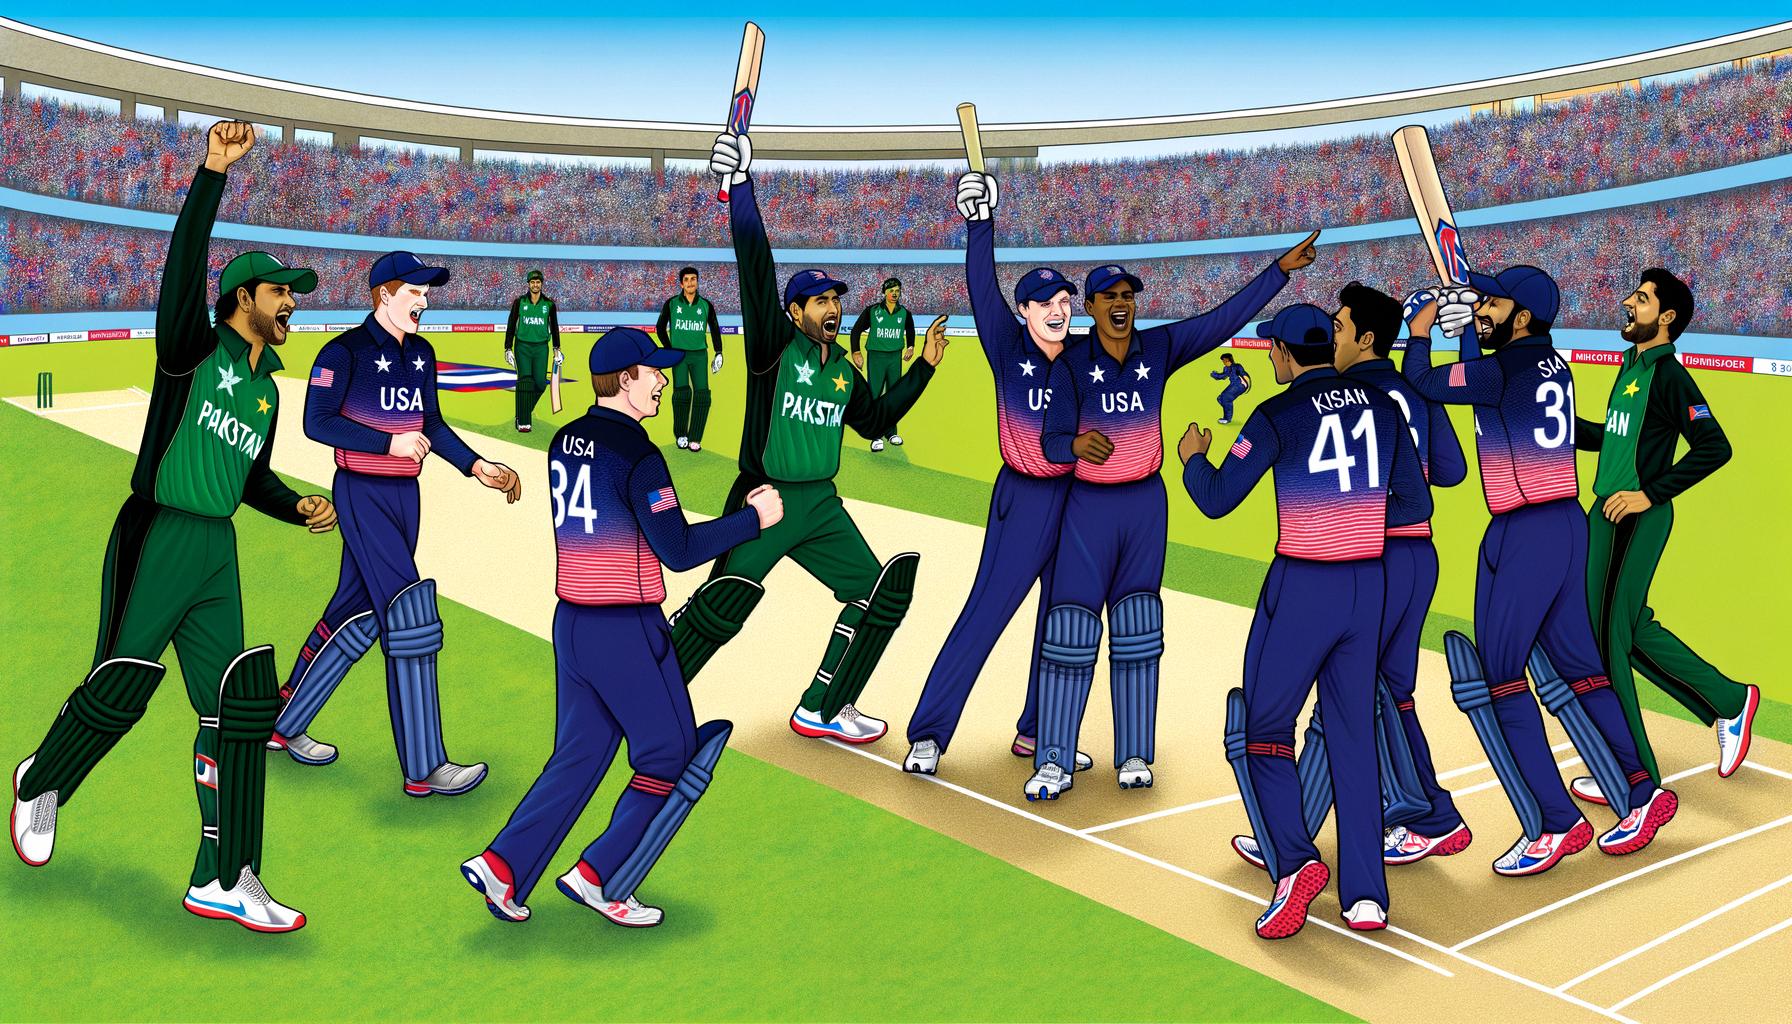 USA upsets Pakistan in T20 World Cup